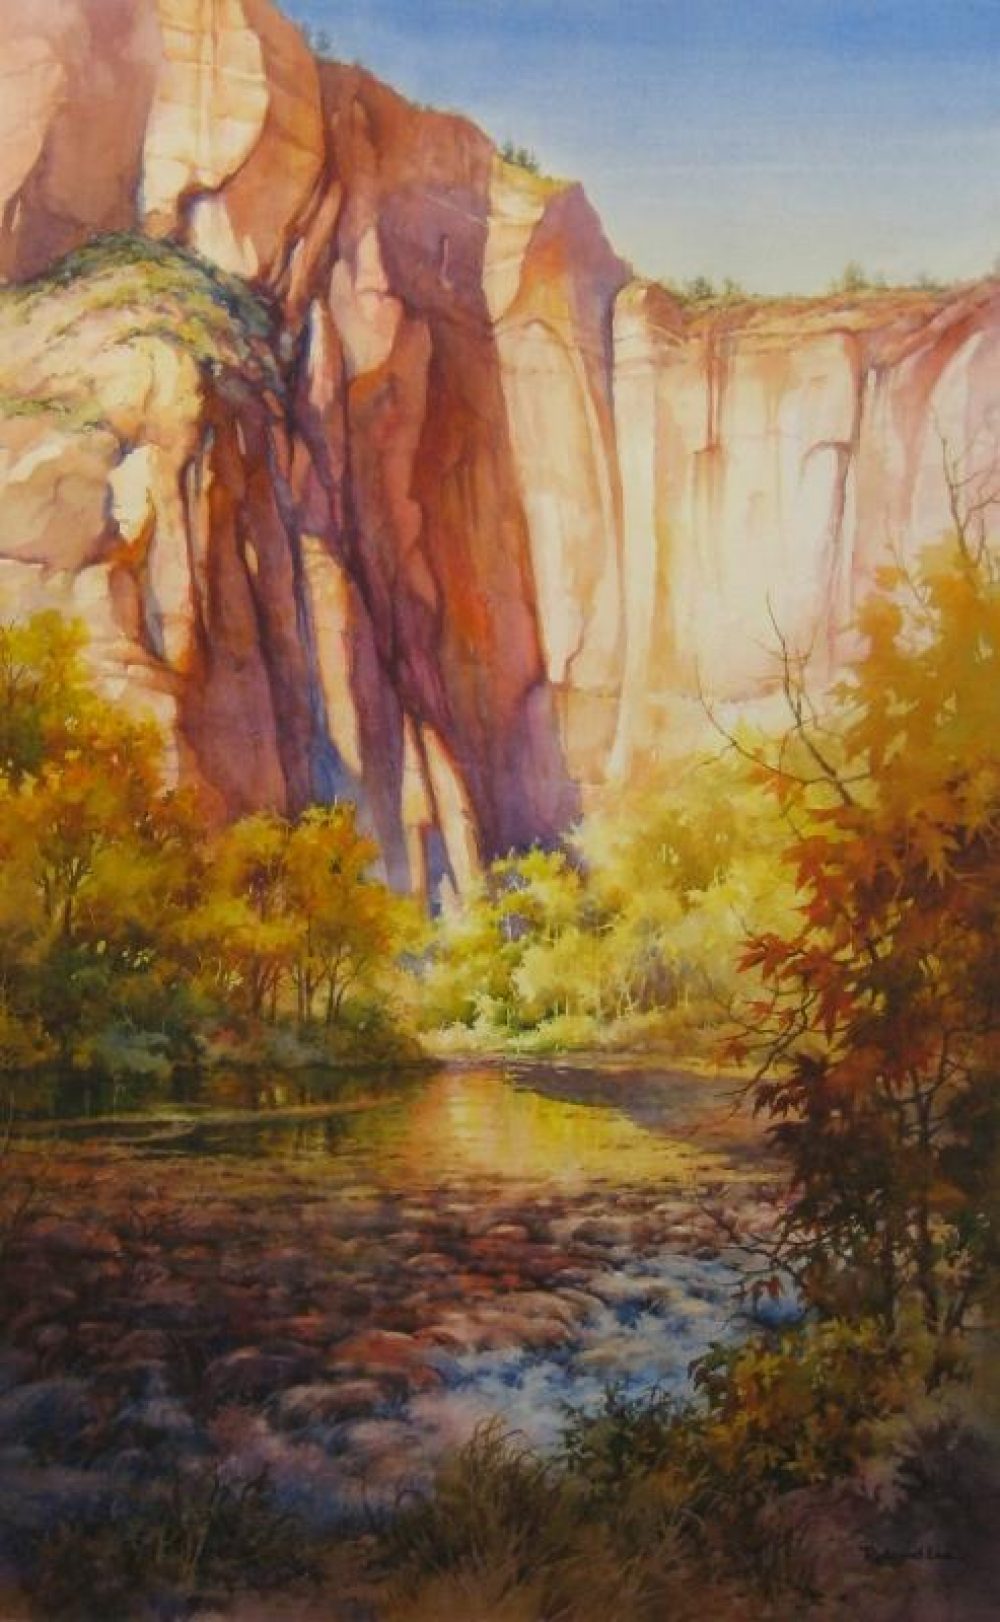 Solace at Sinawava - Giclee Print - Giclee from an original painting of Zion National Park